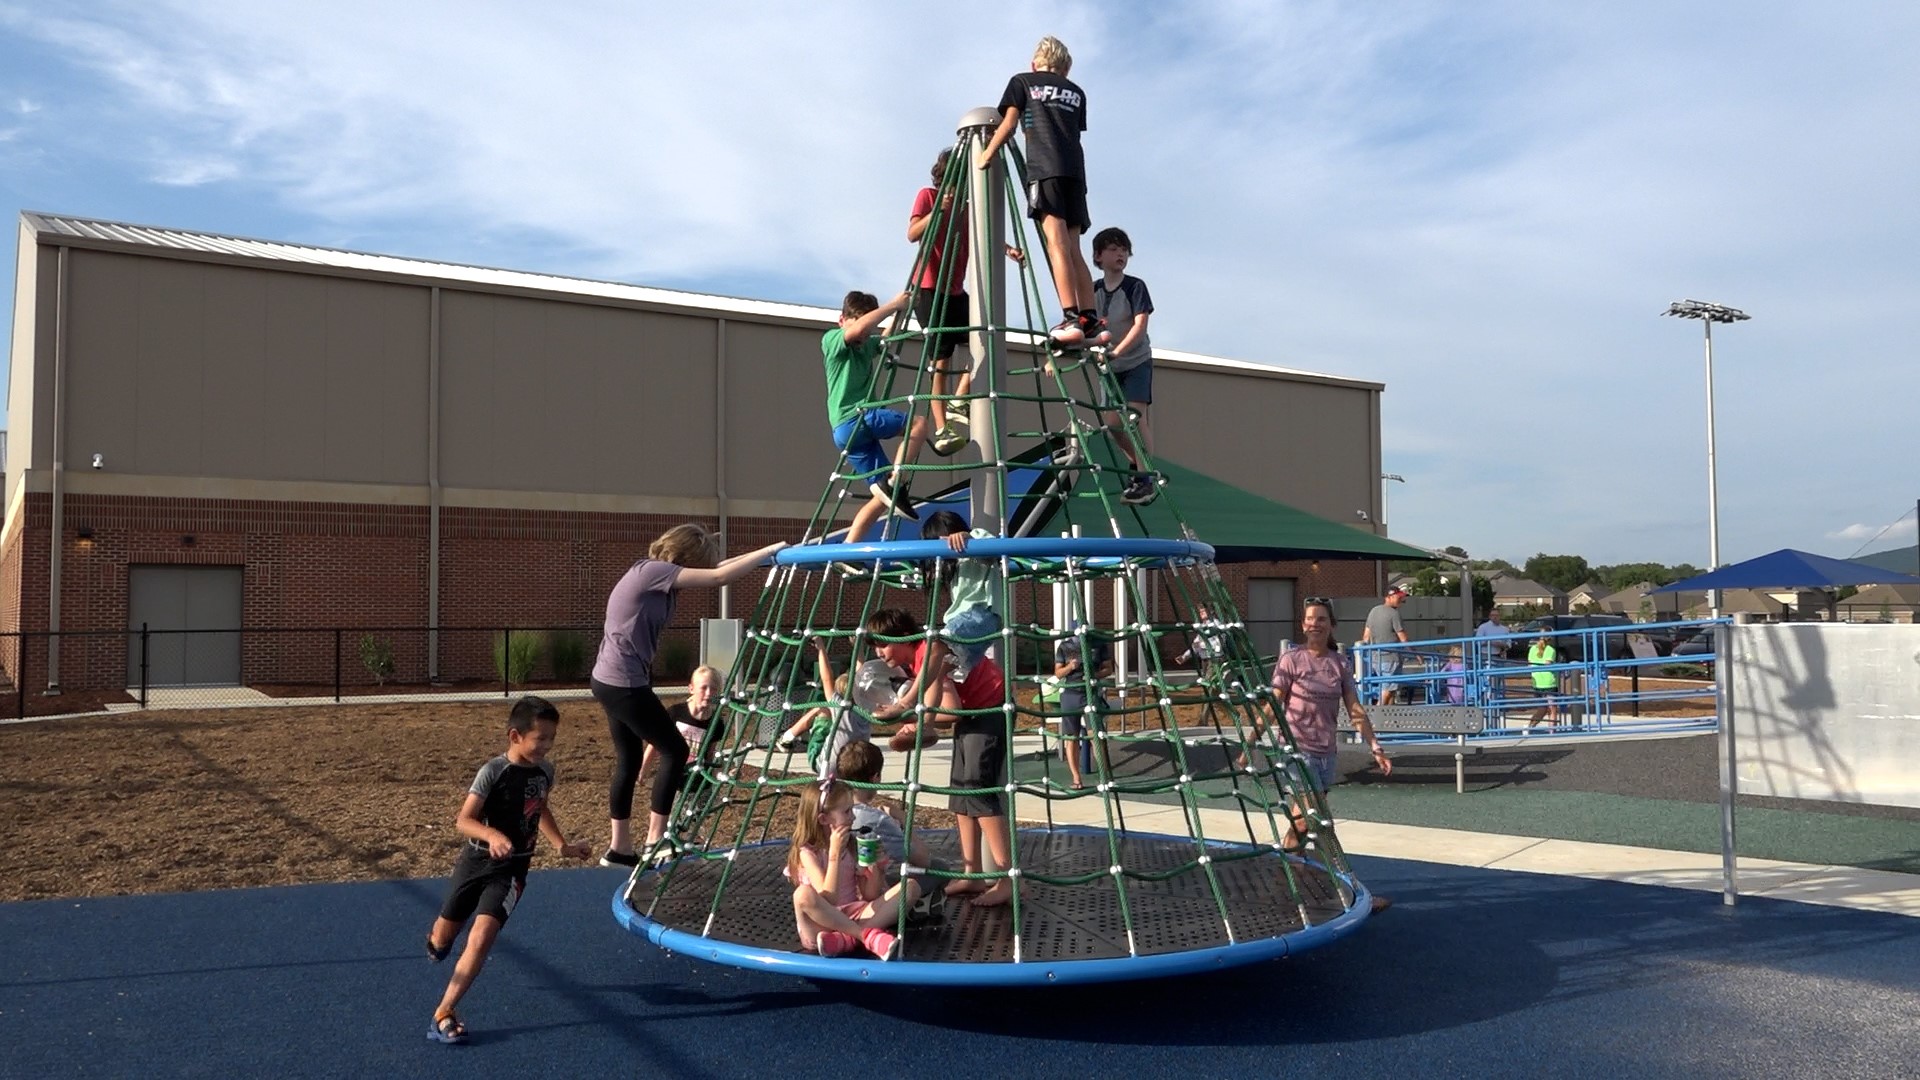 The first universal playground of its kind in Madison County and second universal playground in the state receives an inclusive zipline and rotating robe climber.